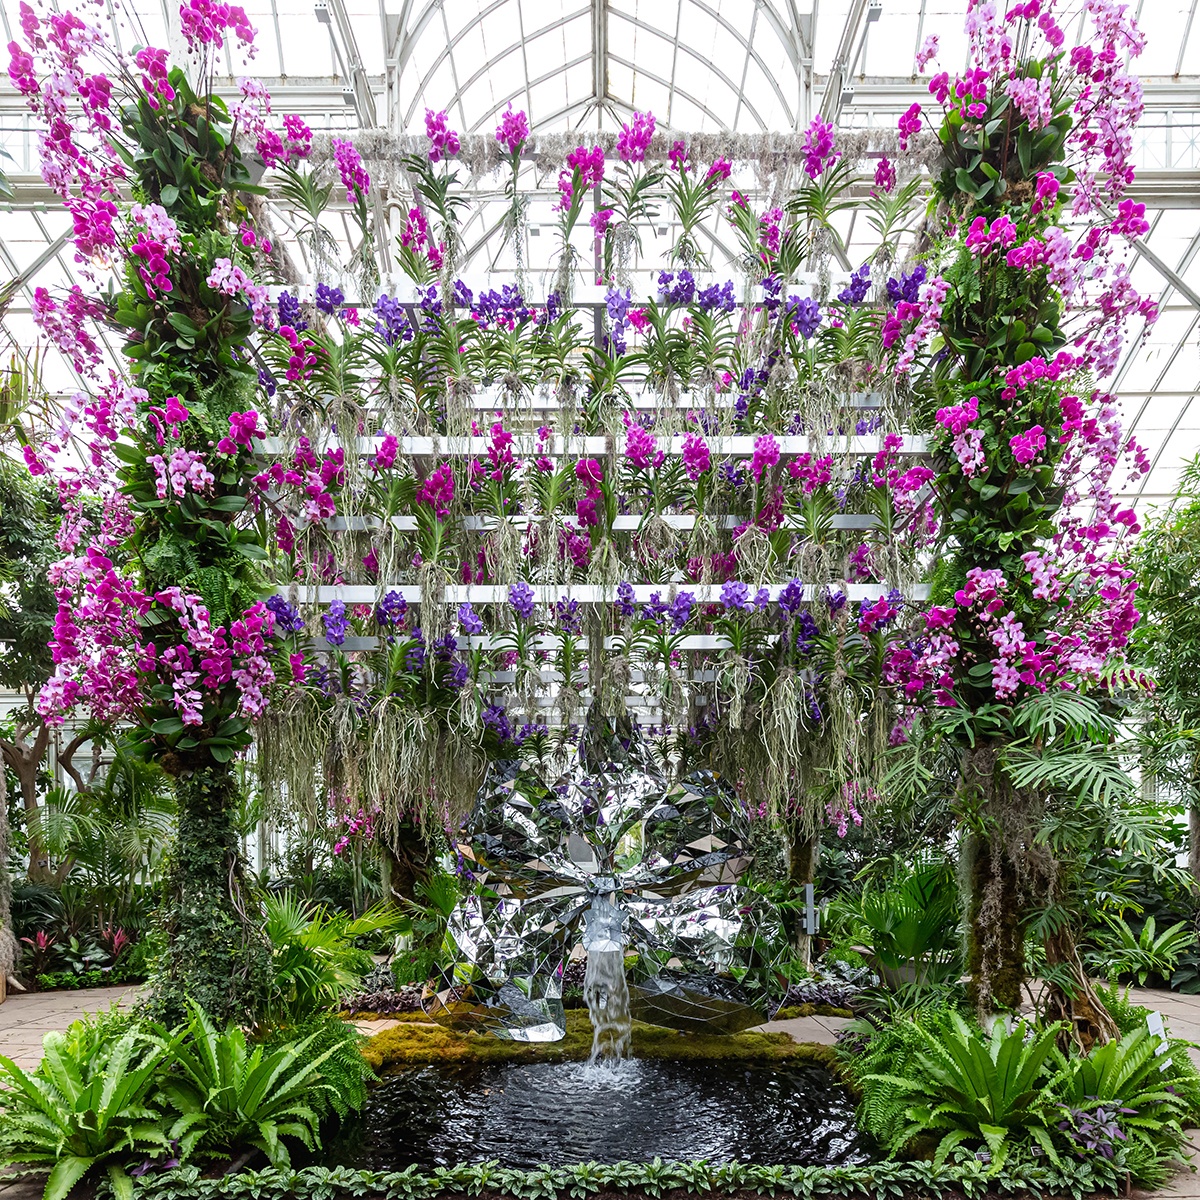 Jeff Leatham Creates An Orchid Filled Wonderland At The New York